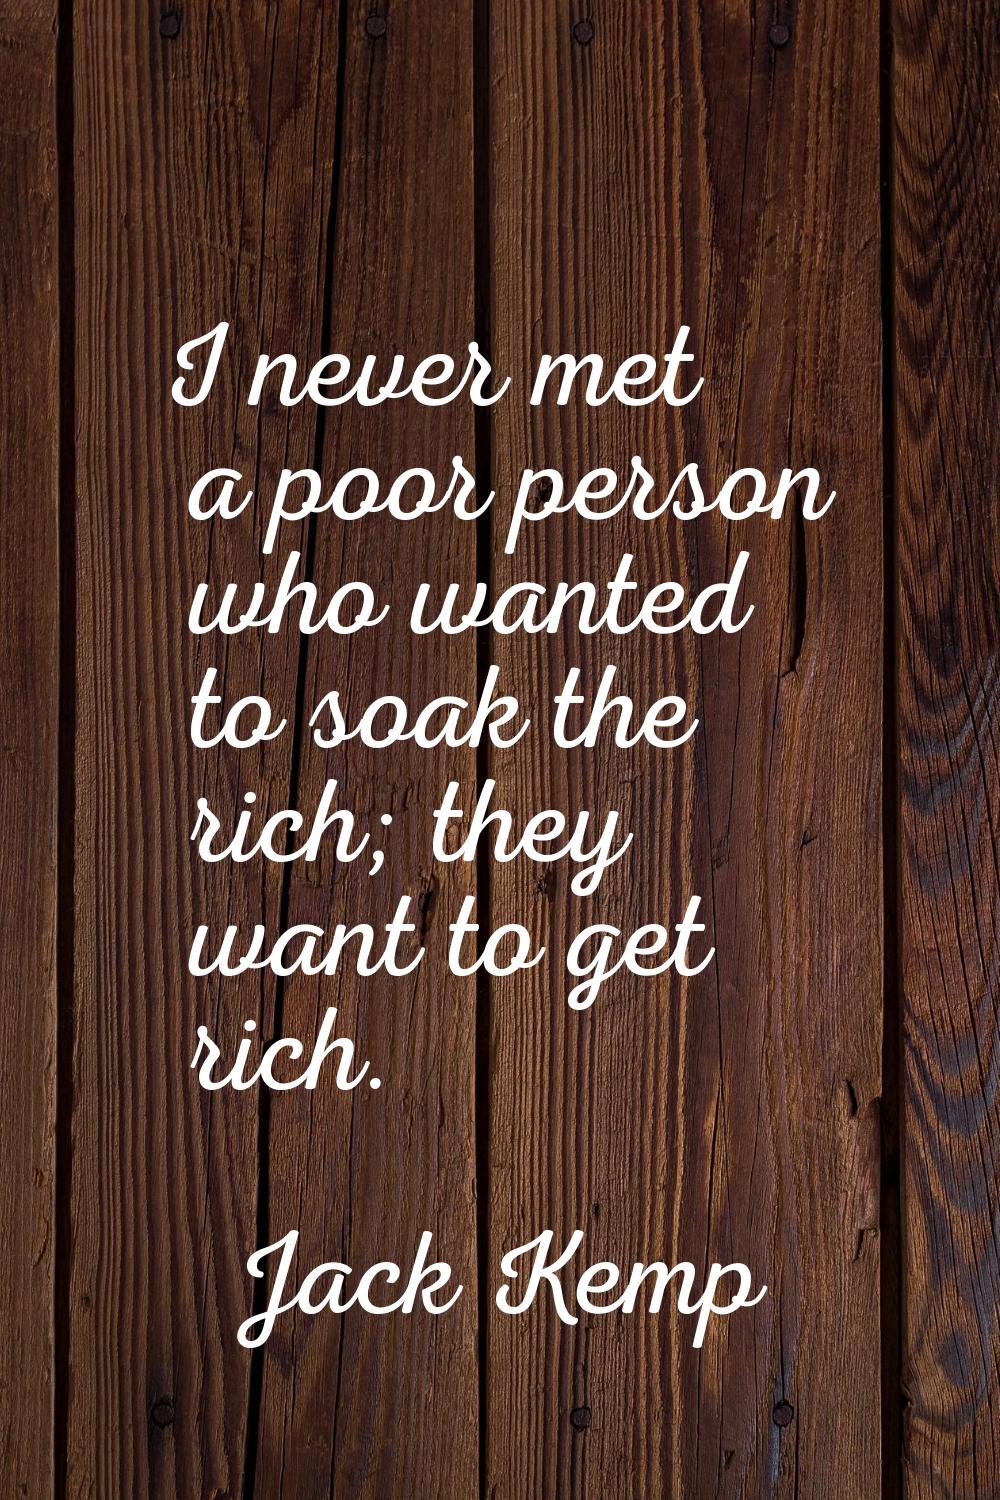 I never met a poor person who wanted to soak the rich; they want to get rich.